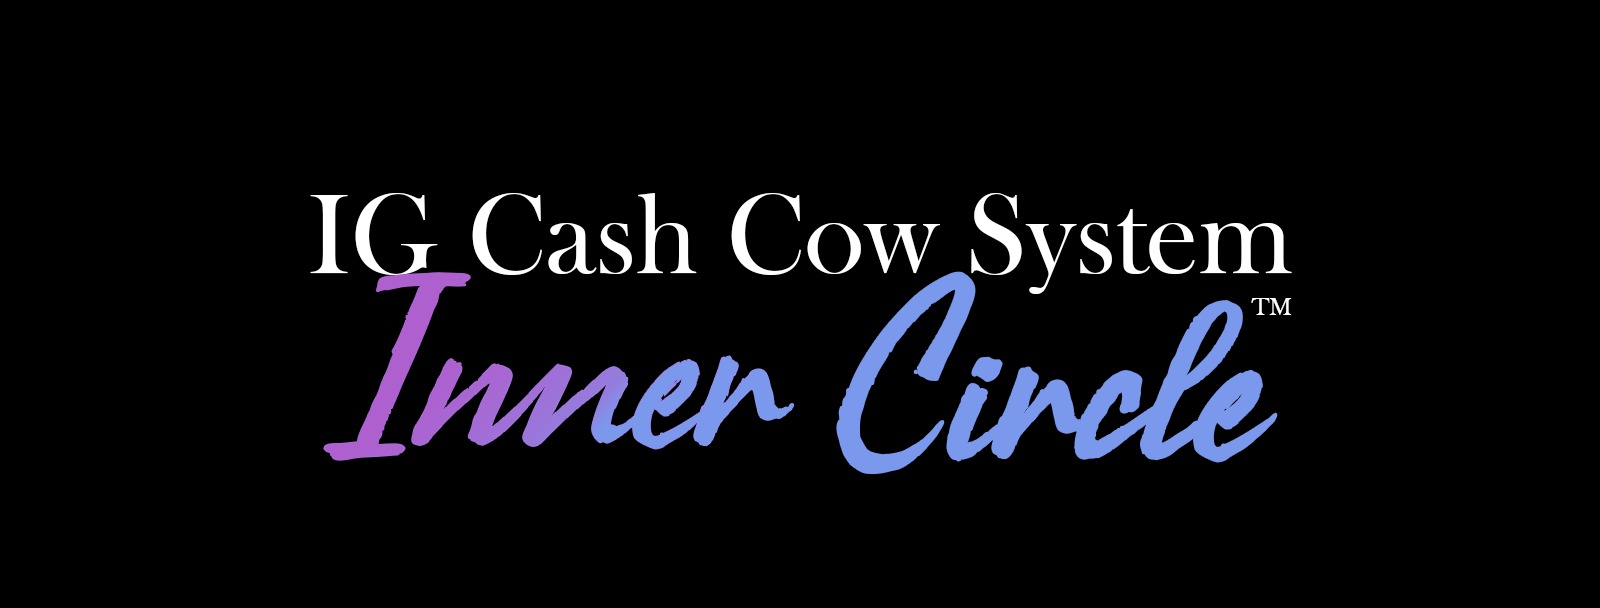 IG Cash Cow System - INNER CIRCLE